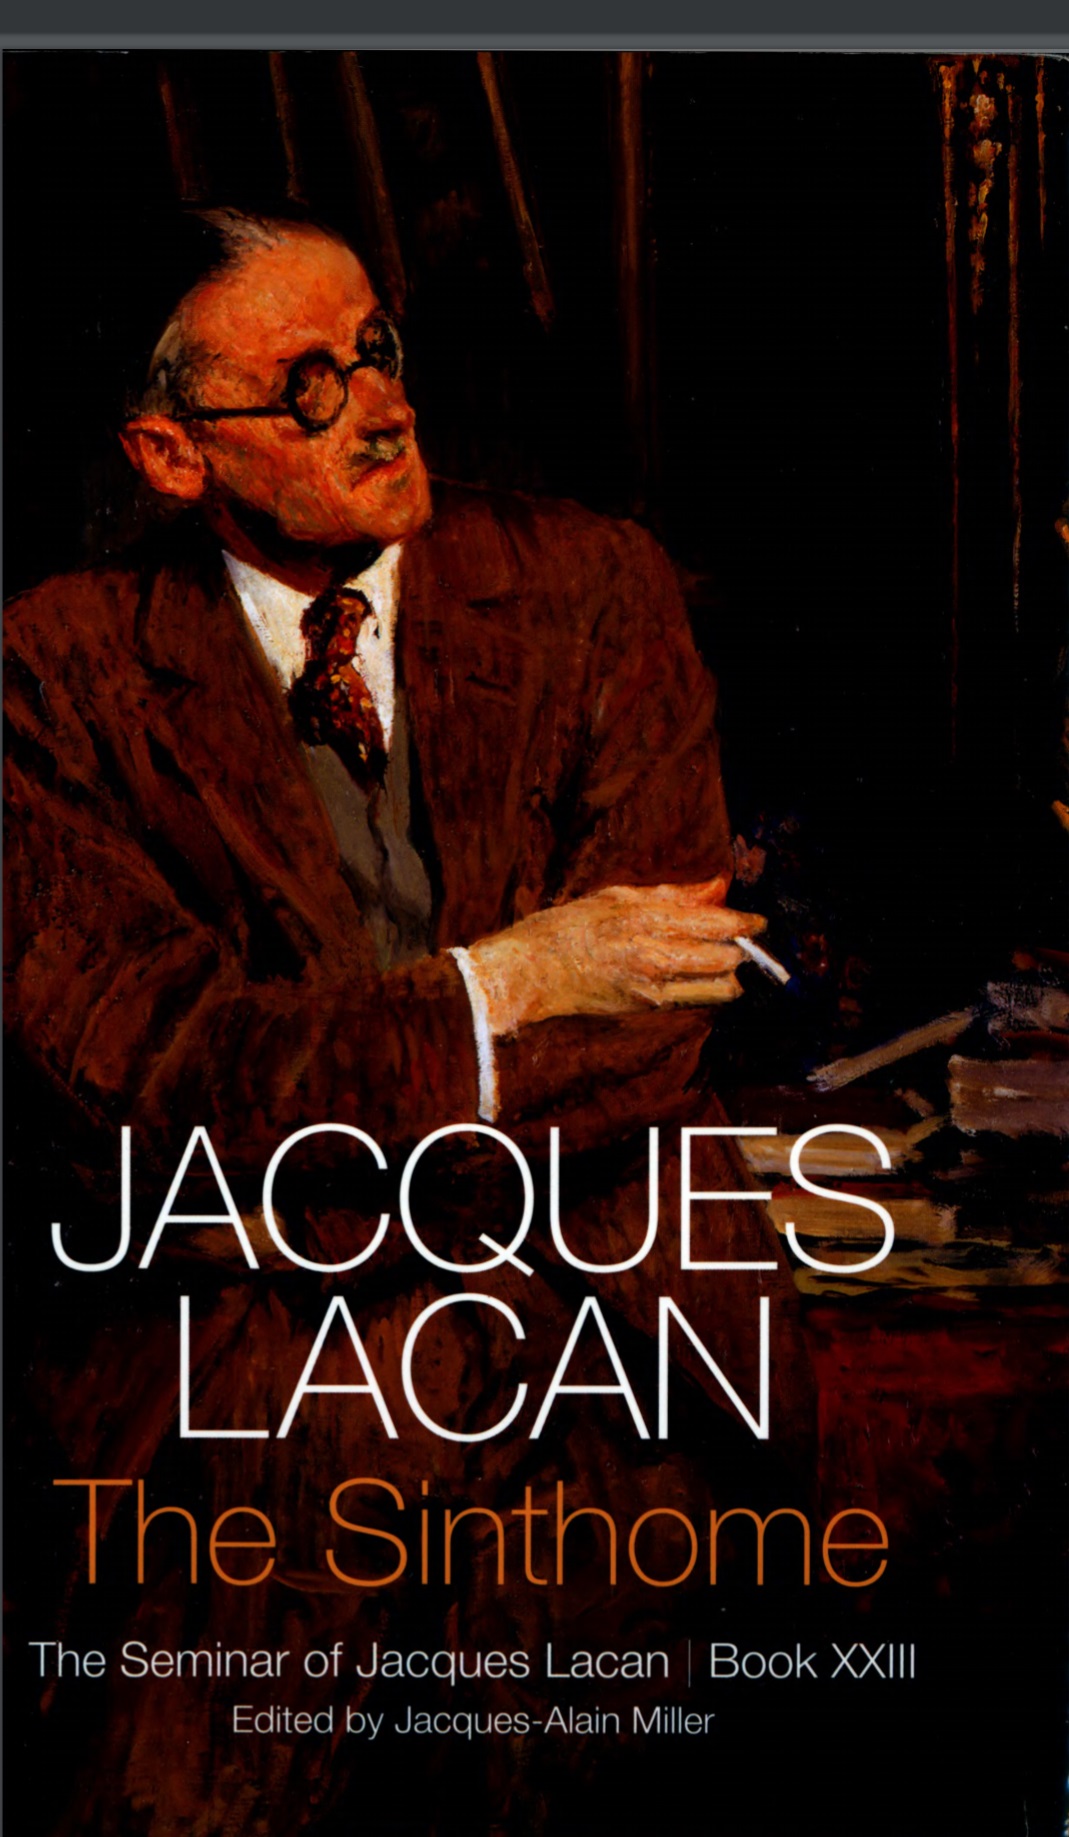 Jacques-lacan-the-seminar-of-jacques-lacan-book-xxiii-1975-1976-the-sinthome-theoryleaks.jpg